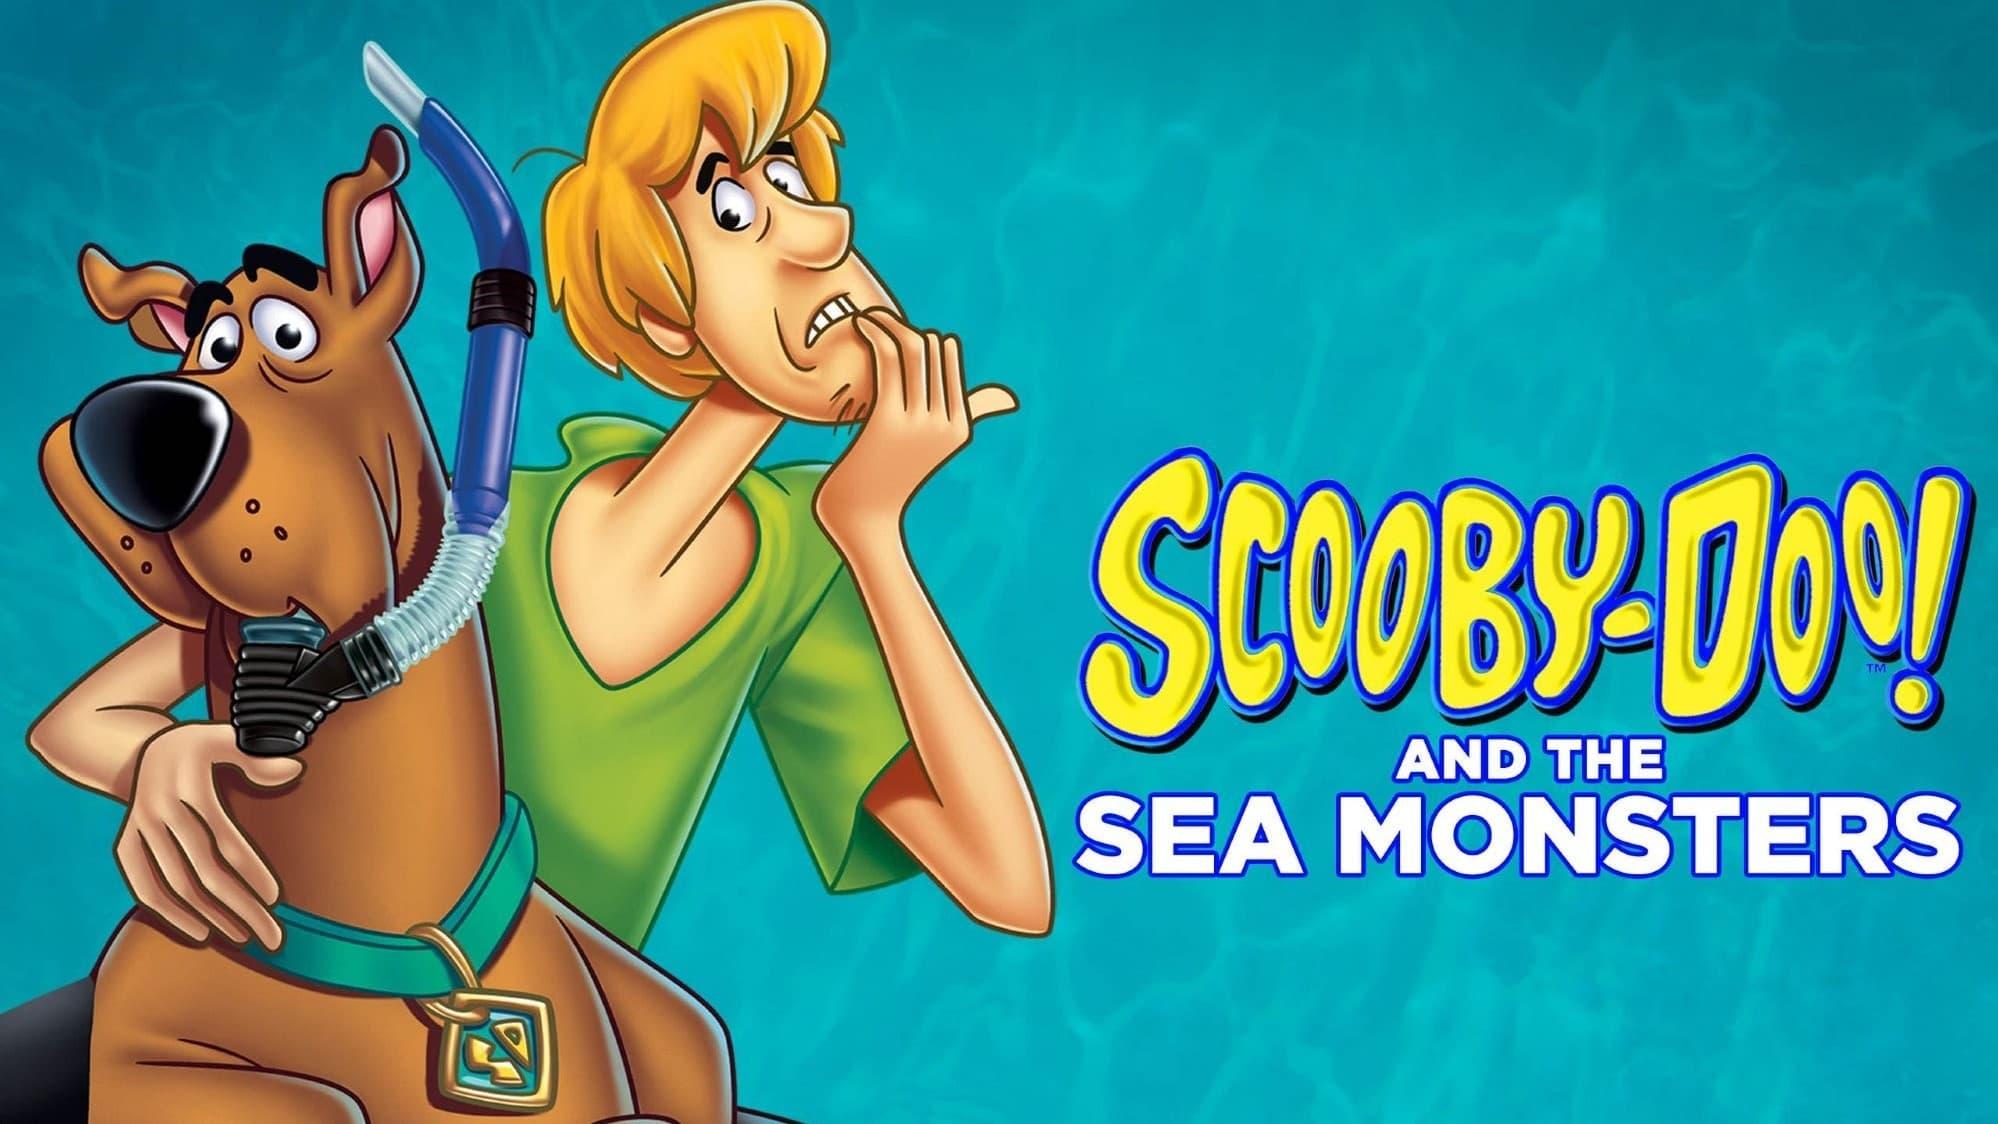 Scooby-Doo! and the Sea Monsters backdrop